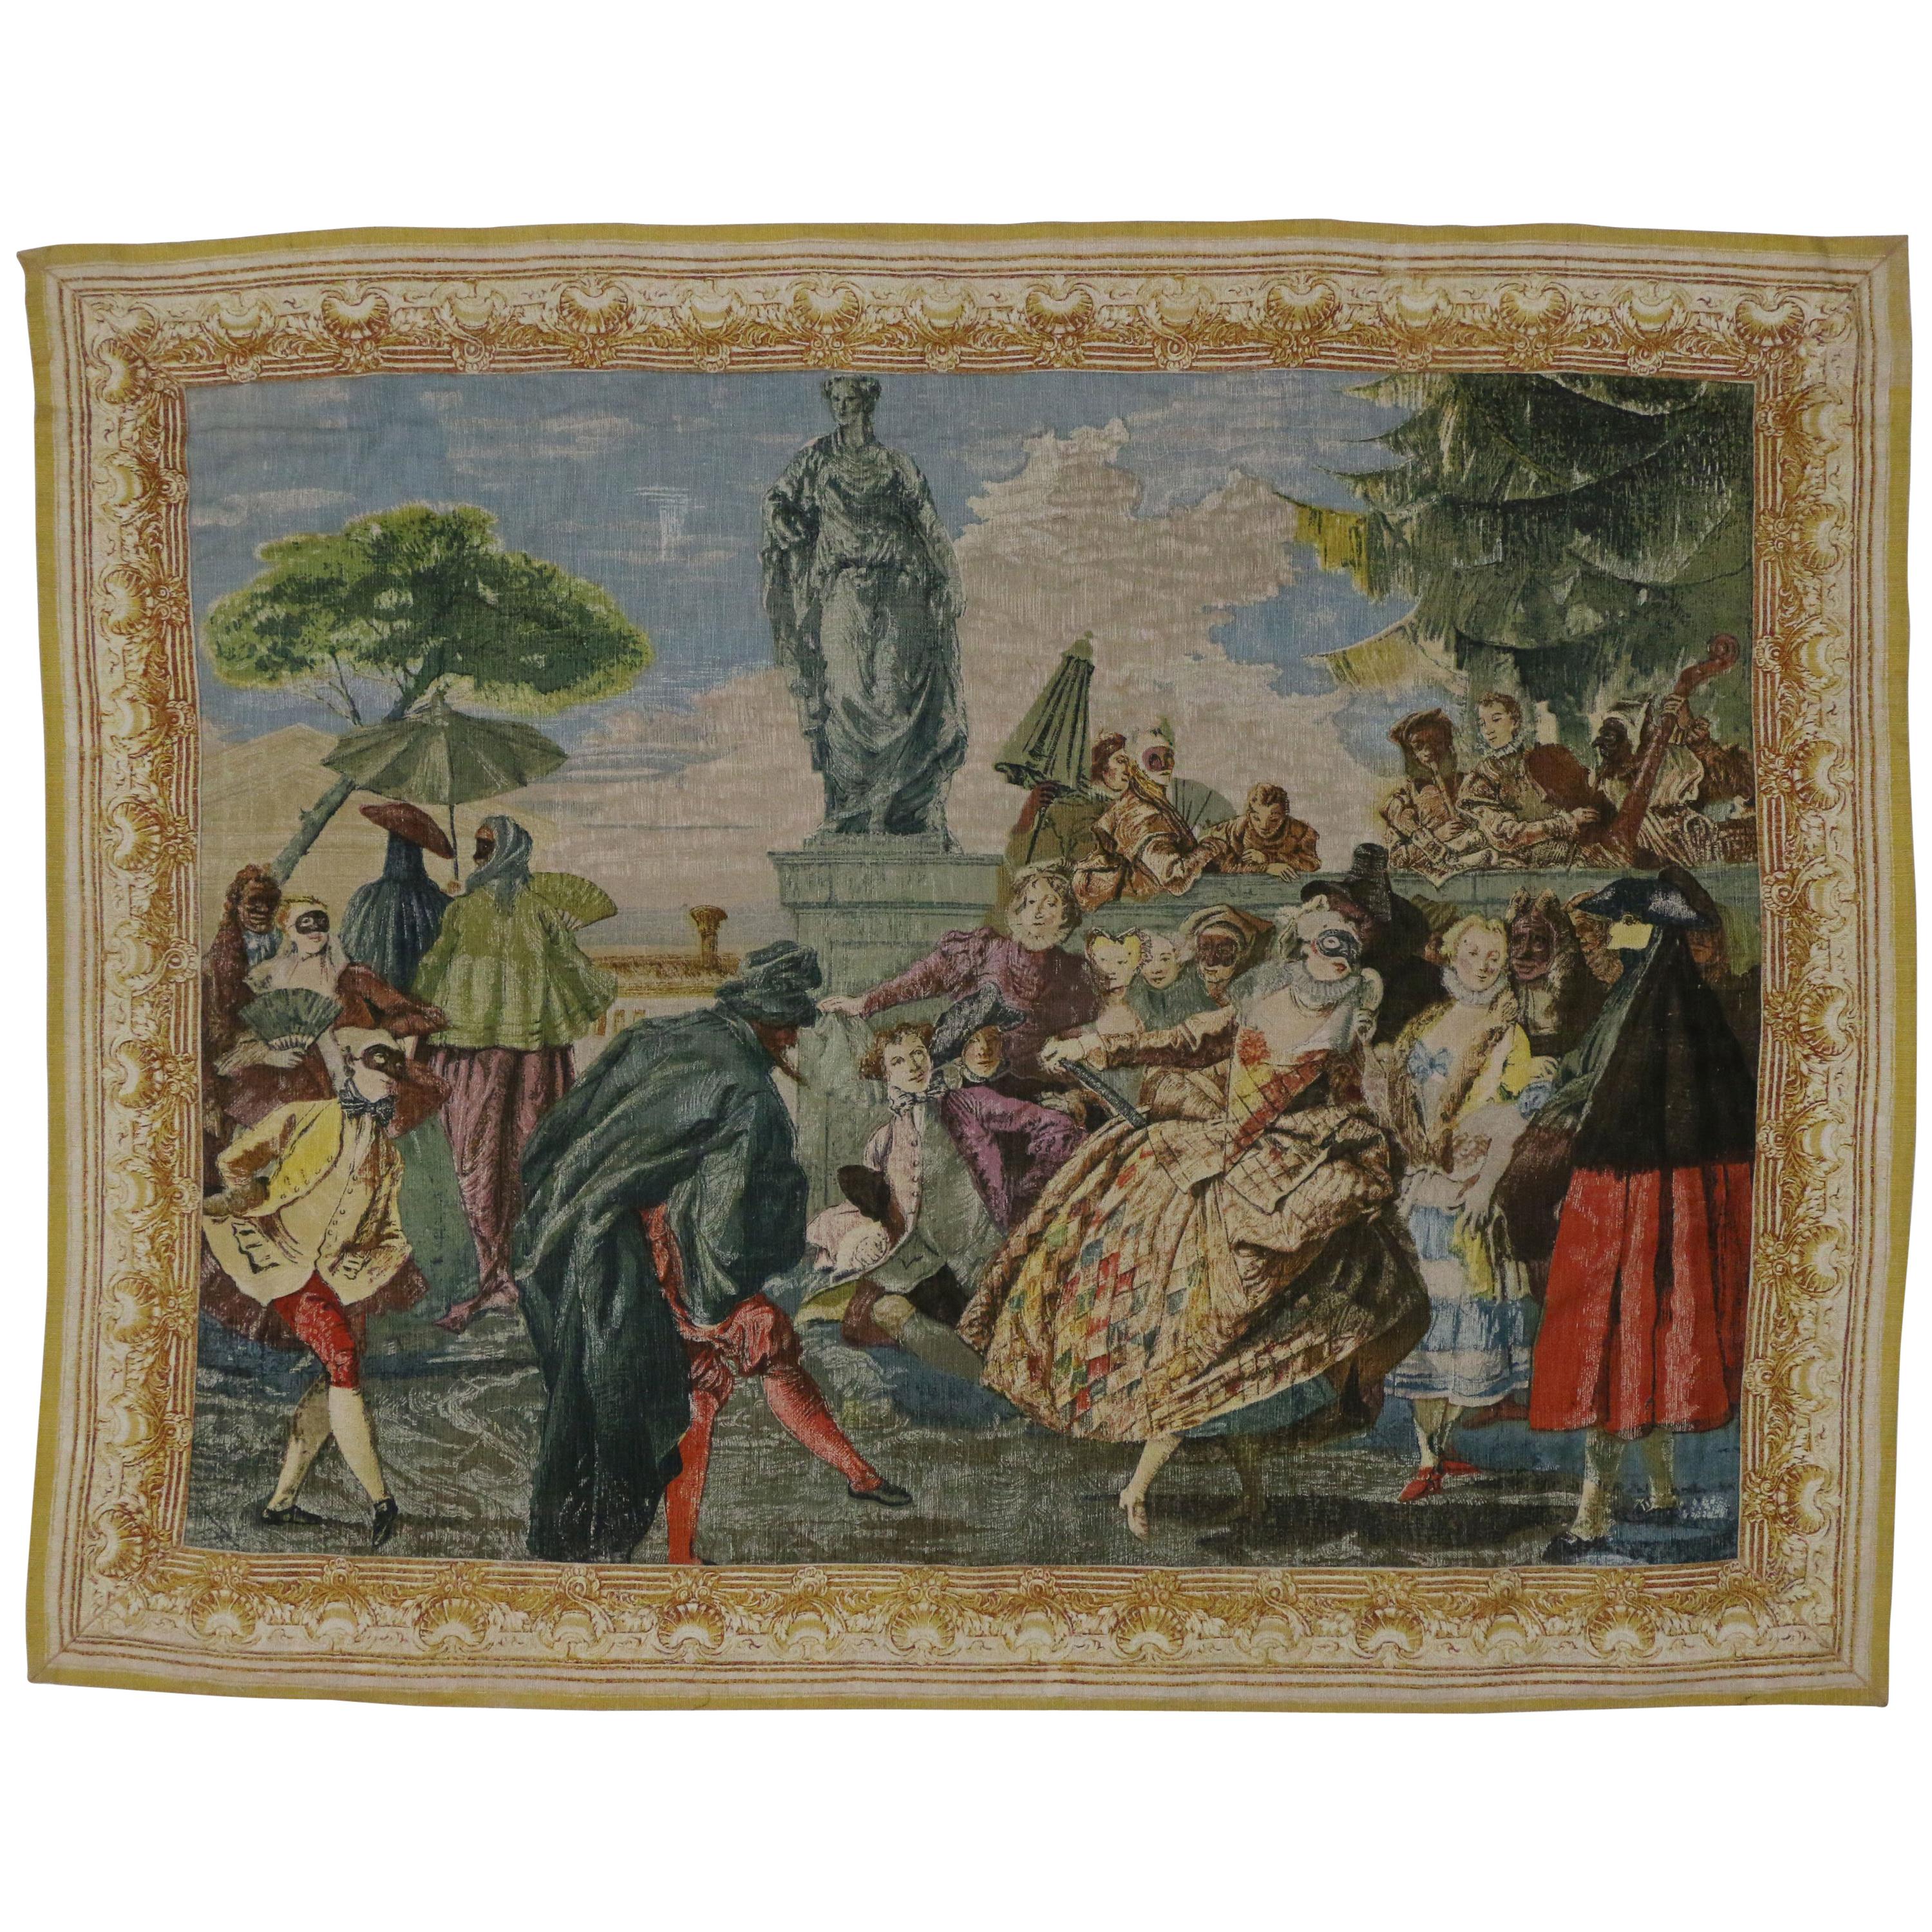 Vintage Venetian Tapestry Inspired by Tiepolo, The Minuet, Carnival Scene